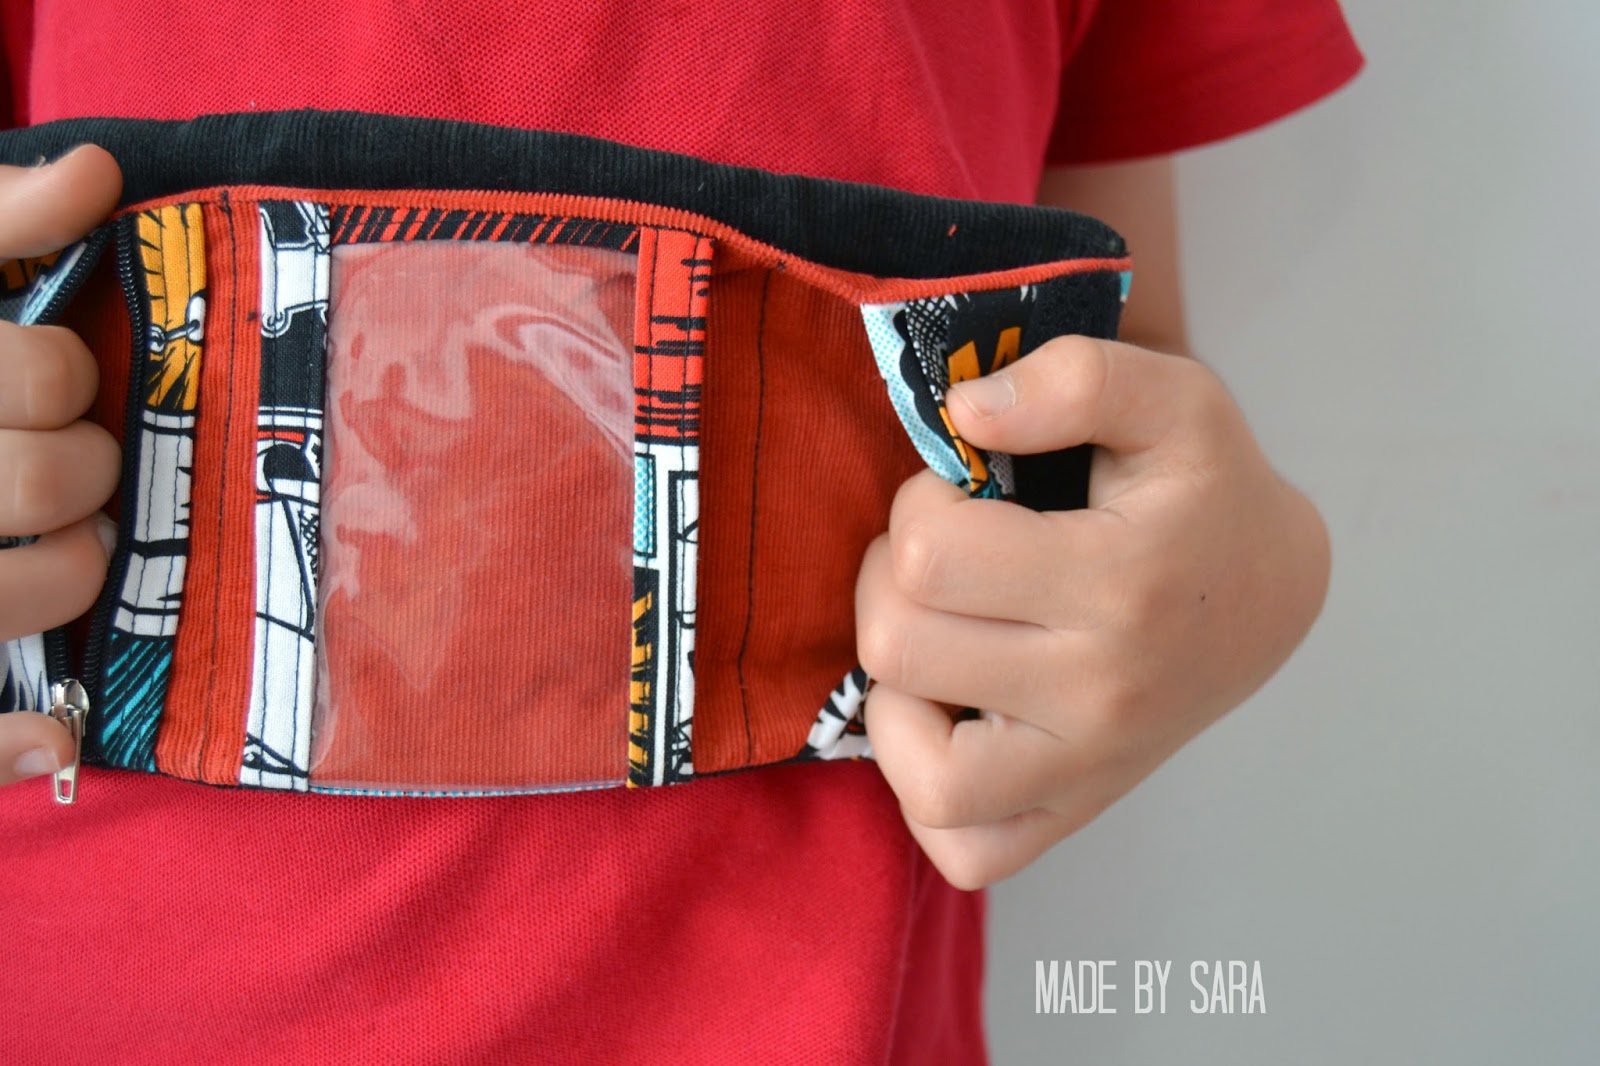 http://made-by-sara.blogspot.com/2014/09/a-wallet-for-little-mr.html